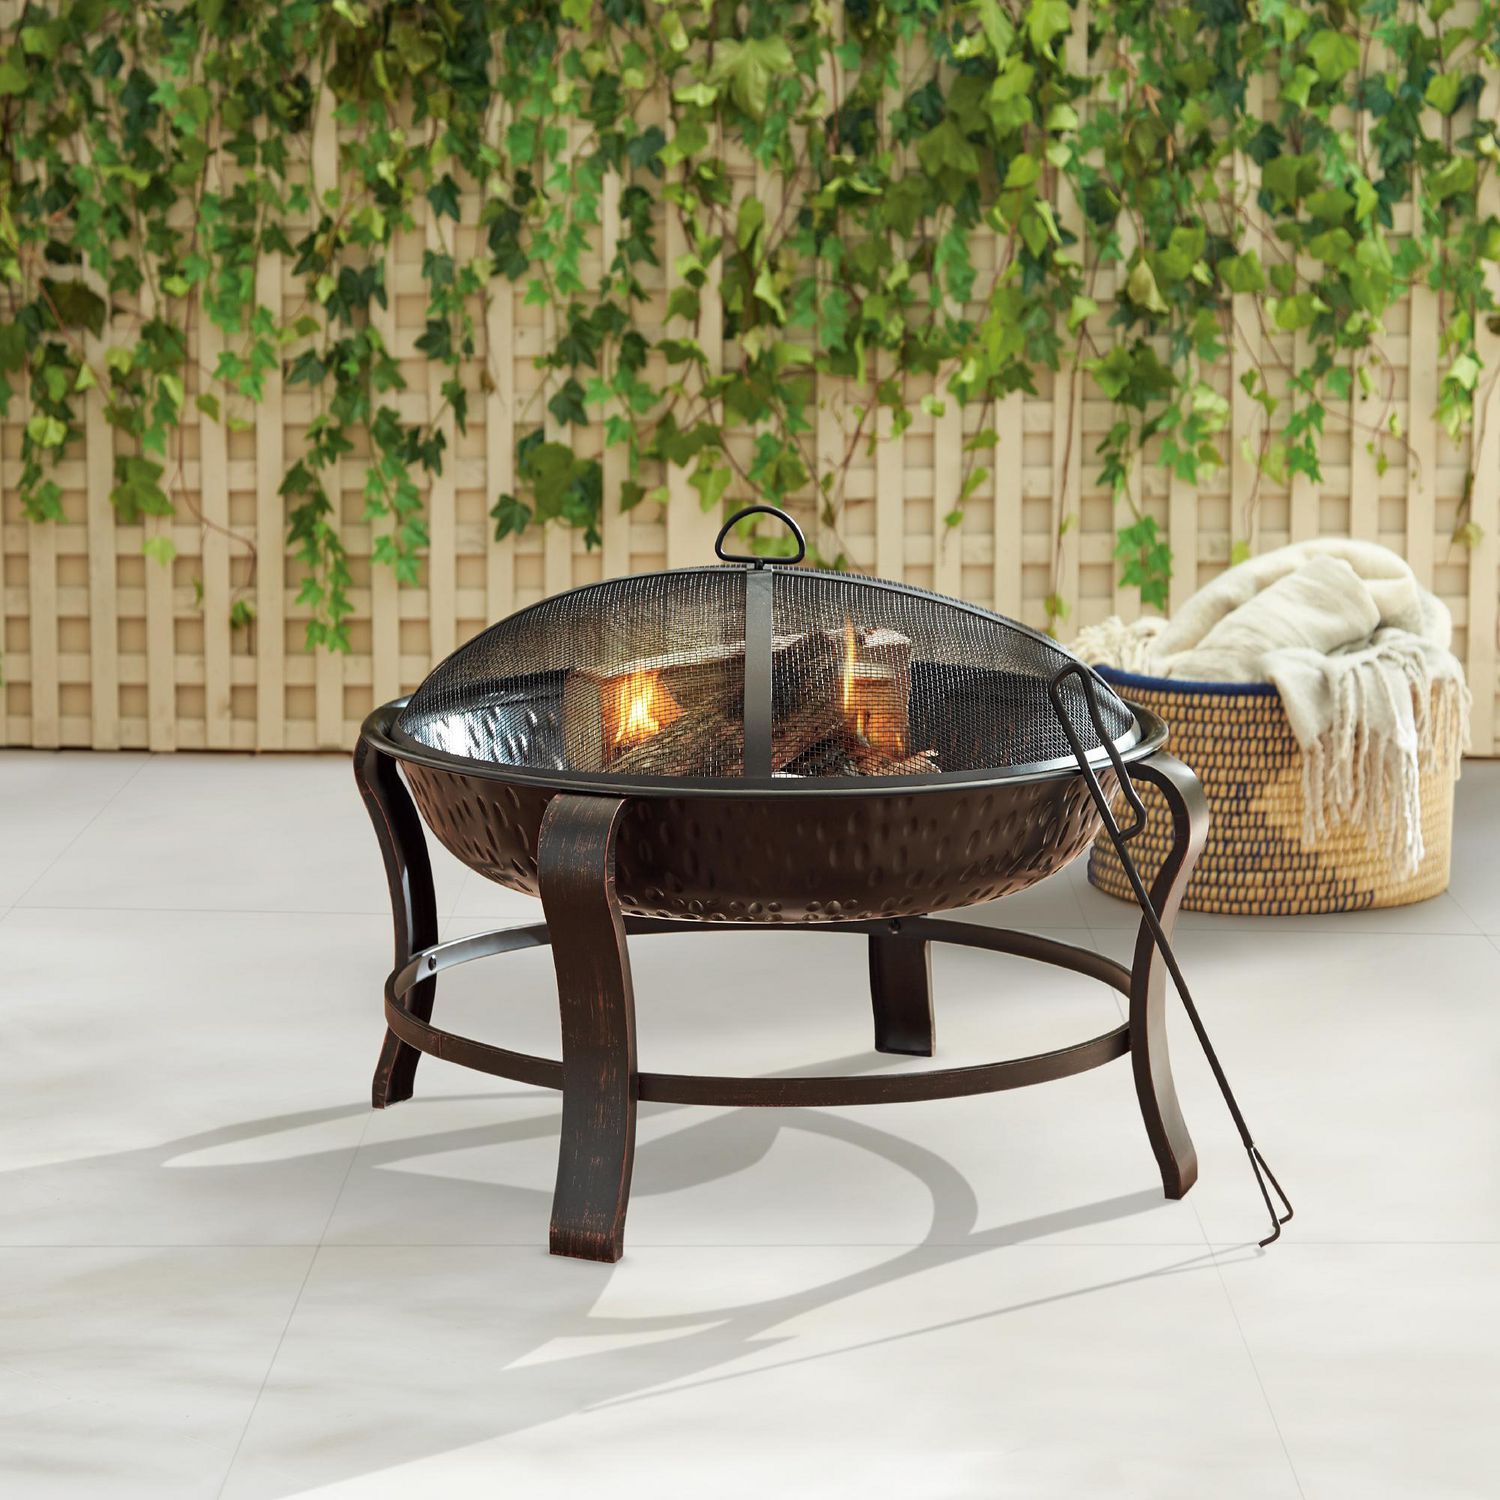 Mainstays 28 In Round Steel Fire Pit, Mainstays Fire Pit